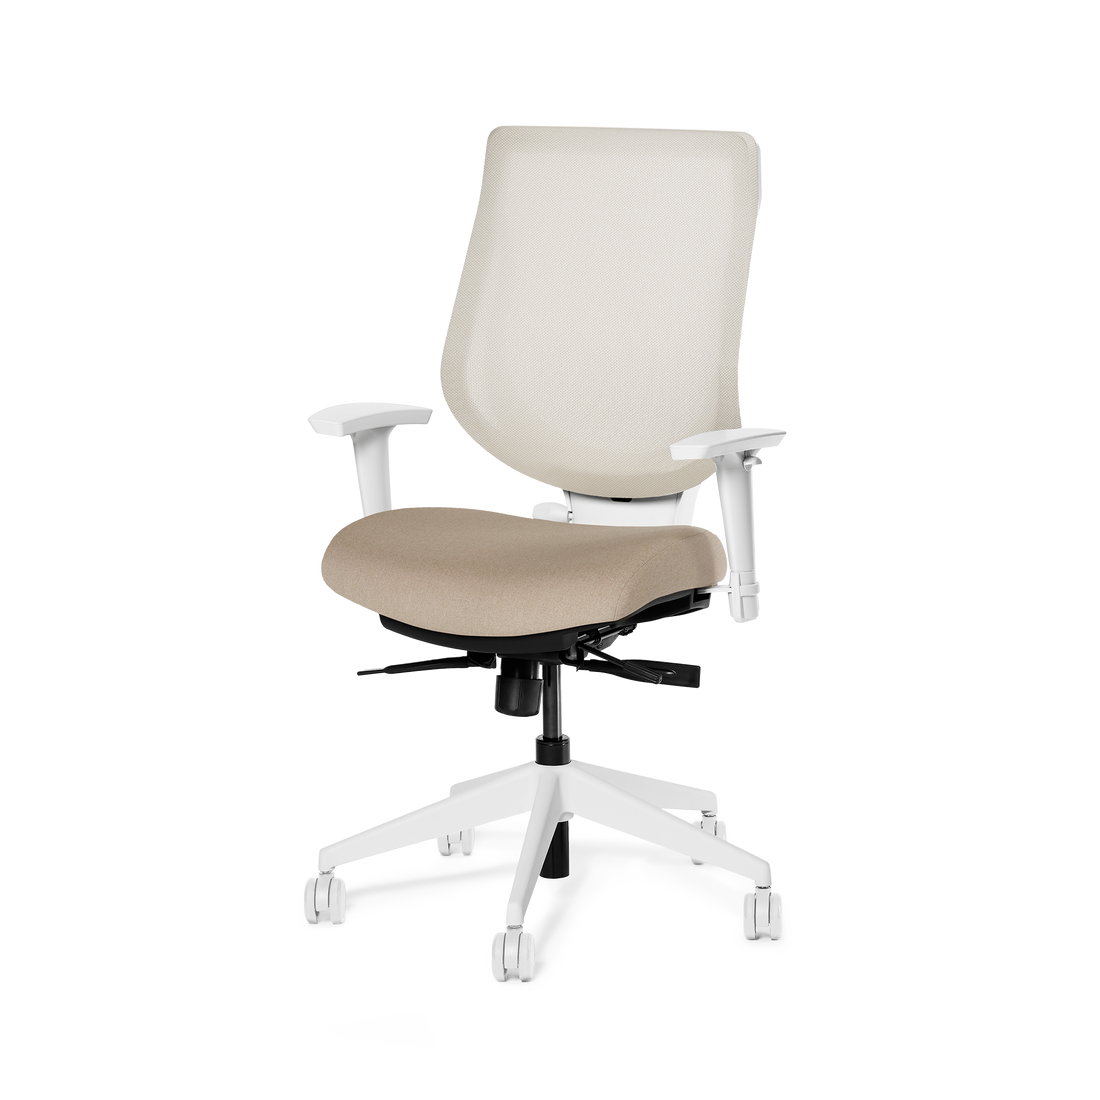 Almost Perfect YouToo ergonomic chair